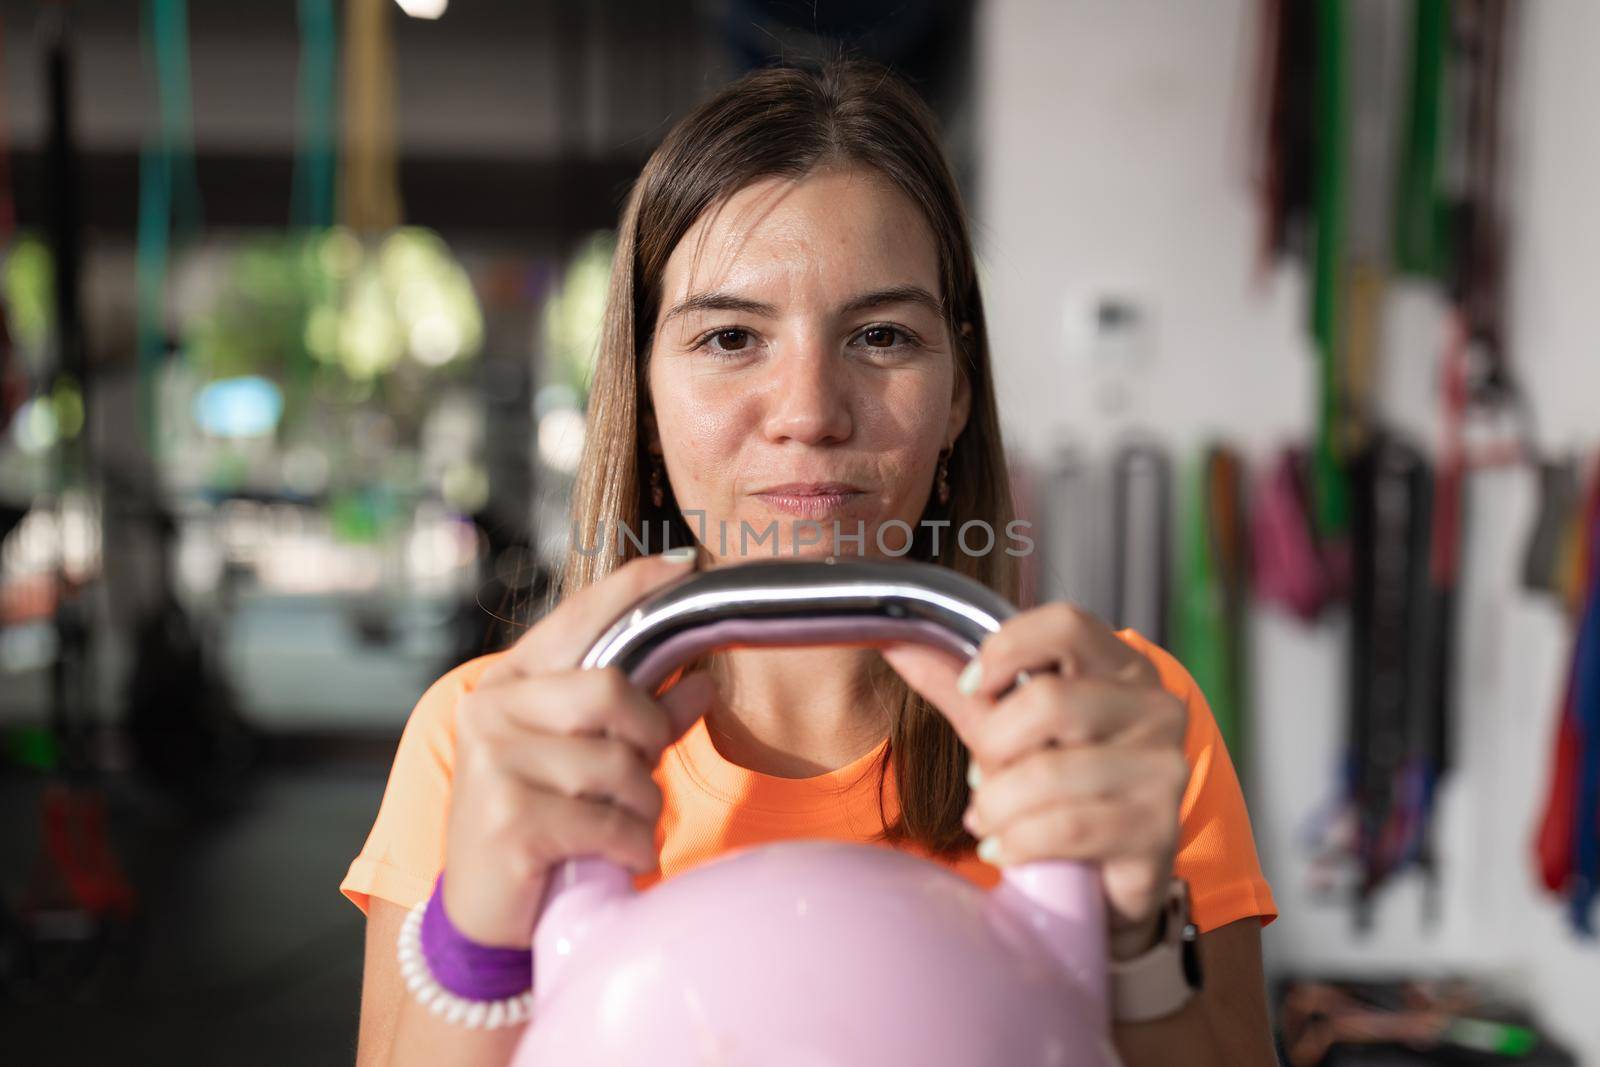 A young woman performs exercises holding the kettlebell by stockrojoverdeyazul